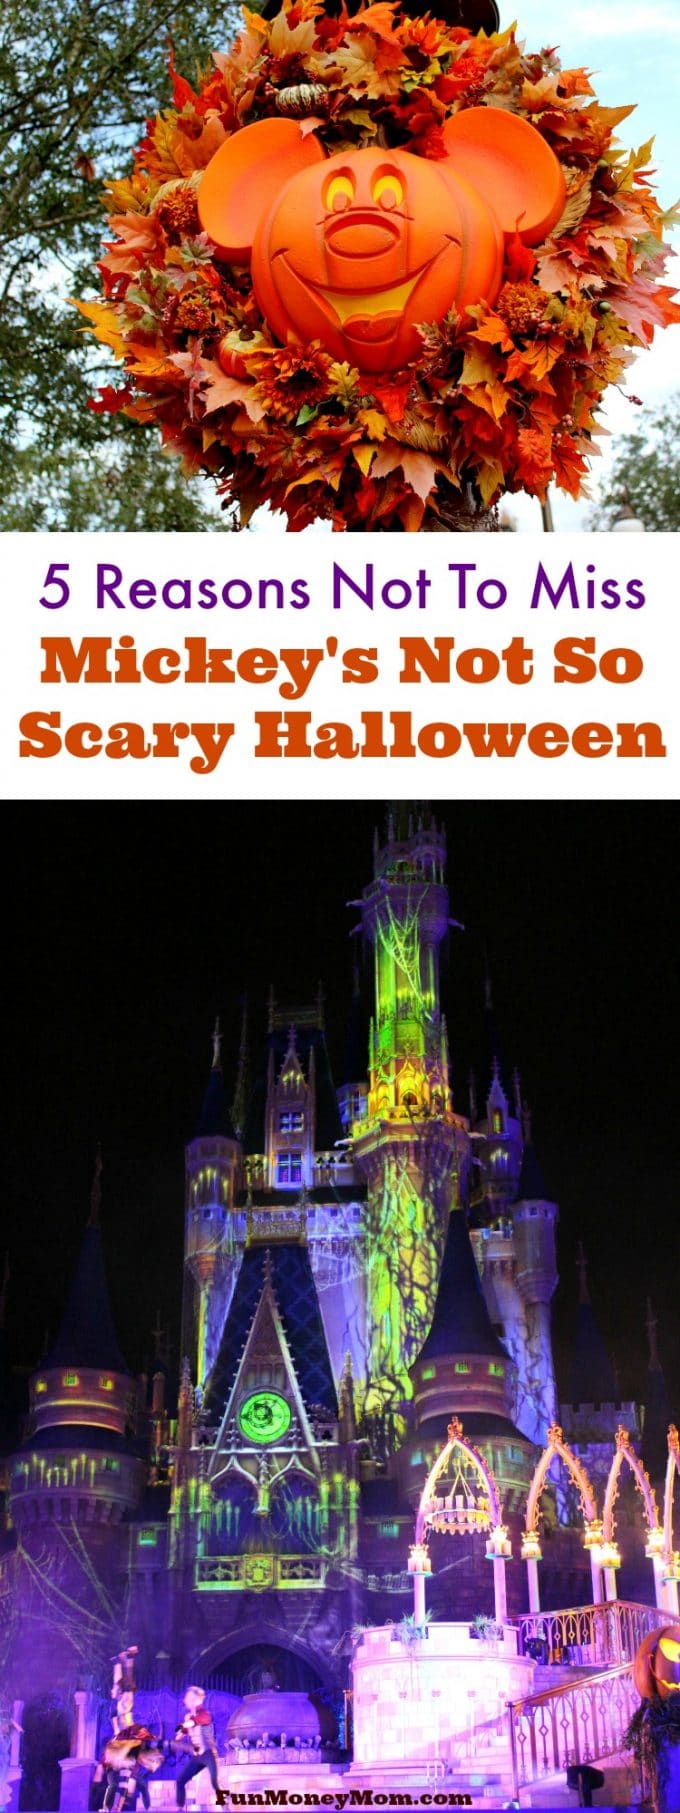 If you've never been to Mickeys Not So Scary Halloween Party, here's why you can't miss this special Disney World annual event!